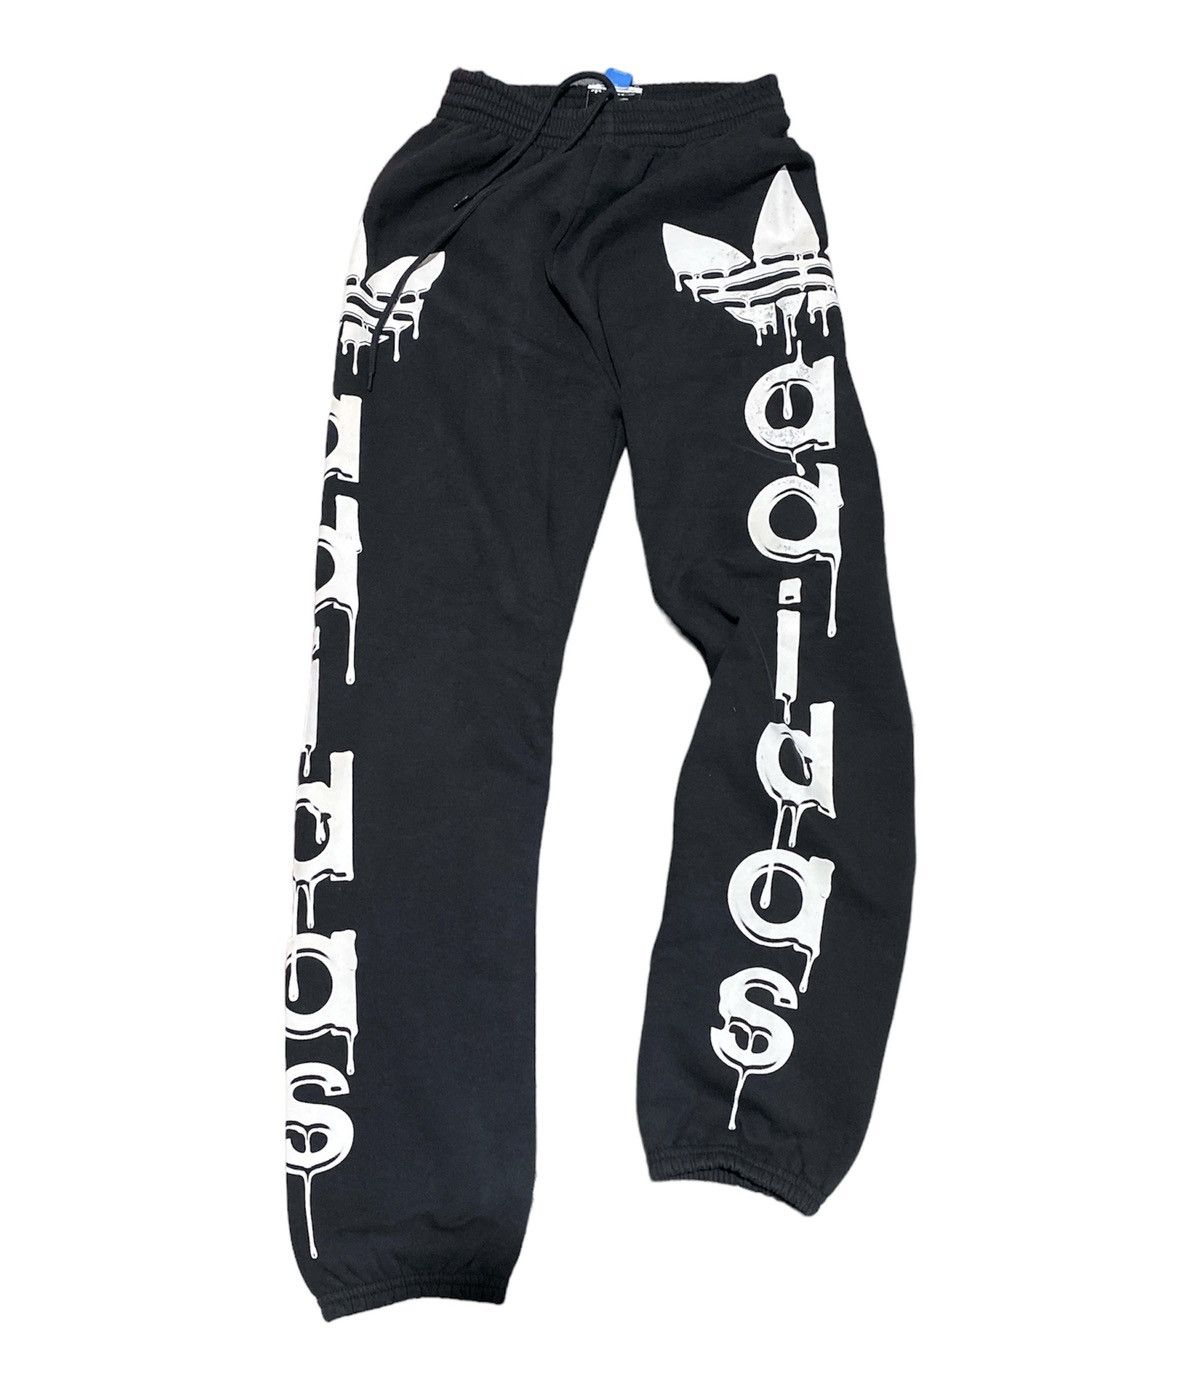 Adidas Jeremy scott x adidas big spell out track pants | Grailed